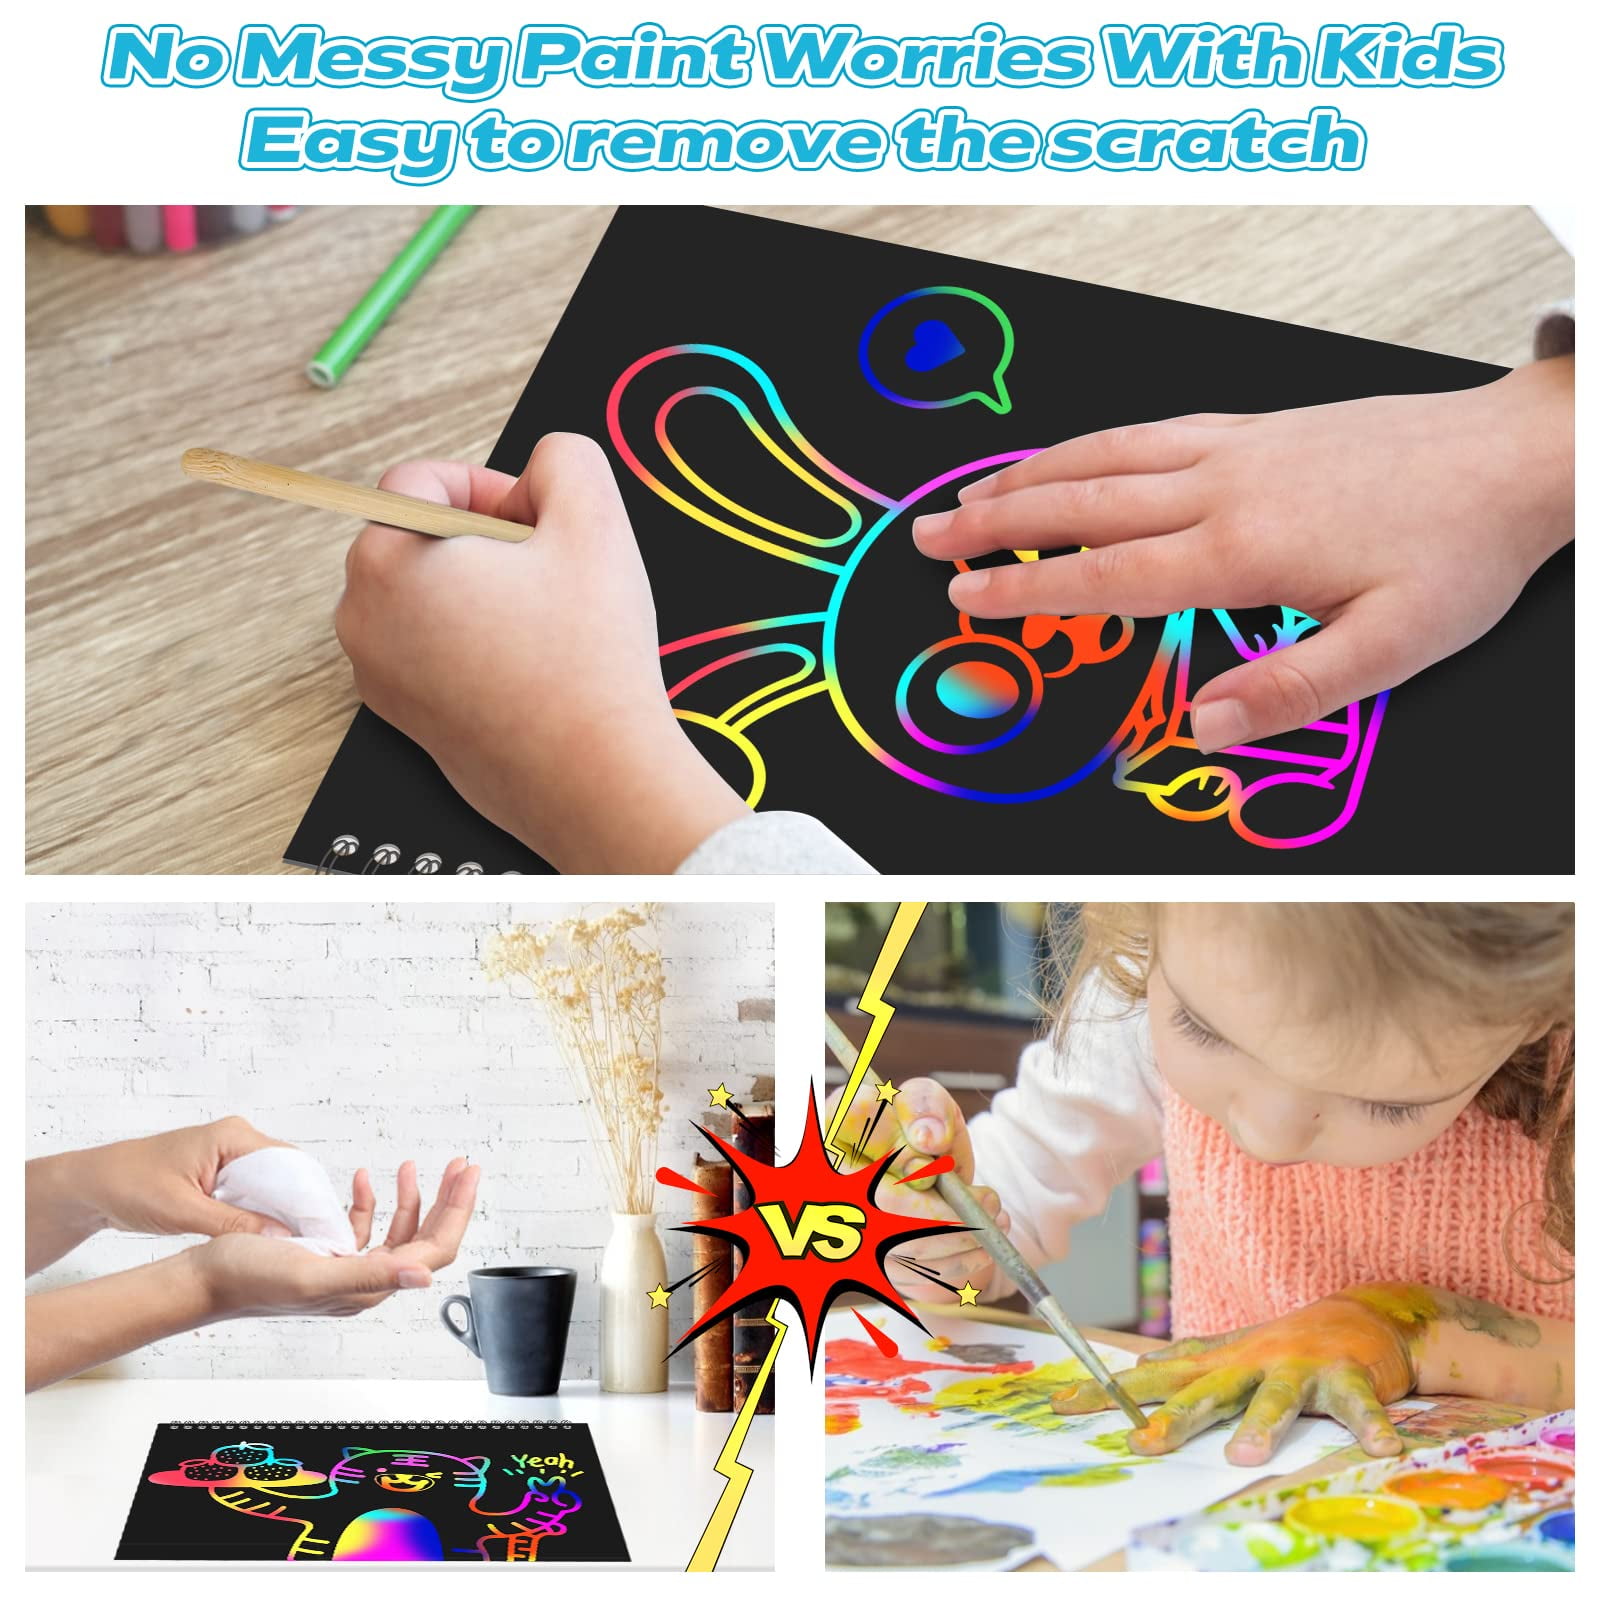 OSLINE Arts and Crafts for Kids Ages 3-5-10 Girls Boys,Rainbow Scratch Paper Art Notebooks,Art Supplies Kit for Kids Gifts,Kids Party Favor Toys for